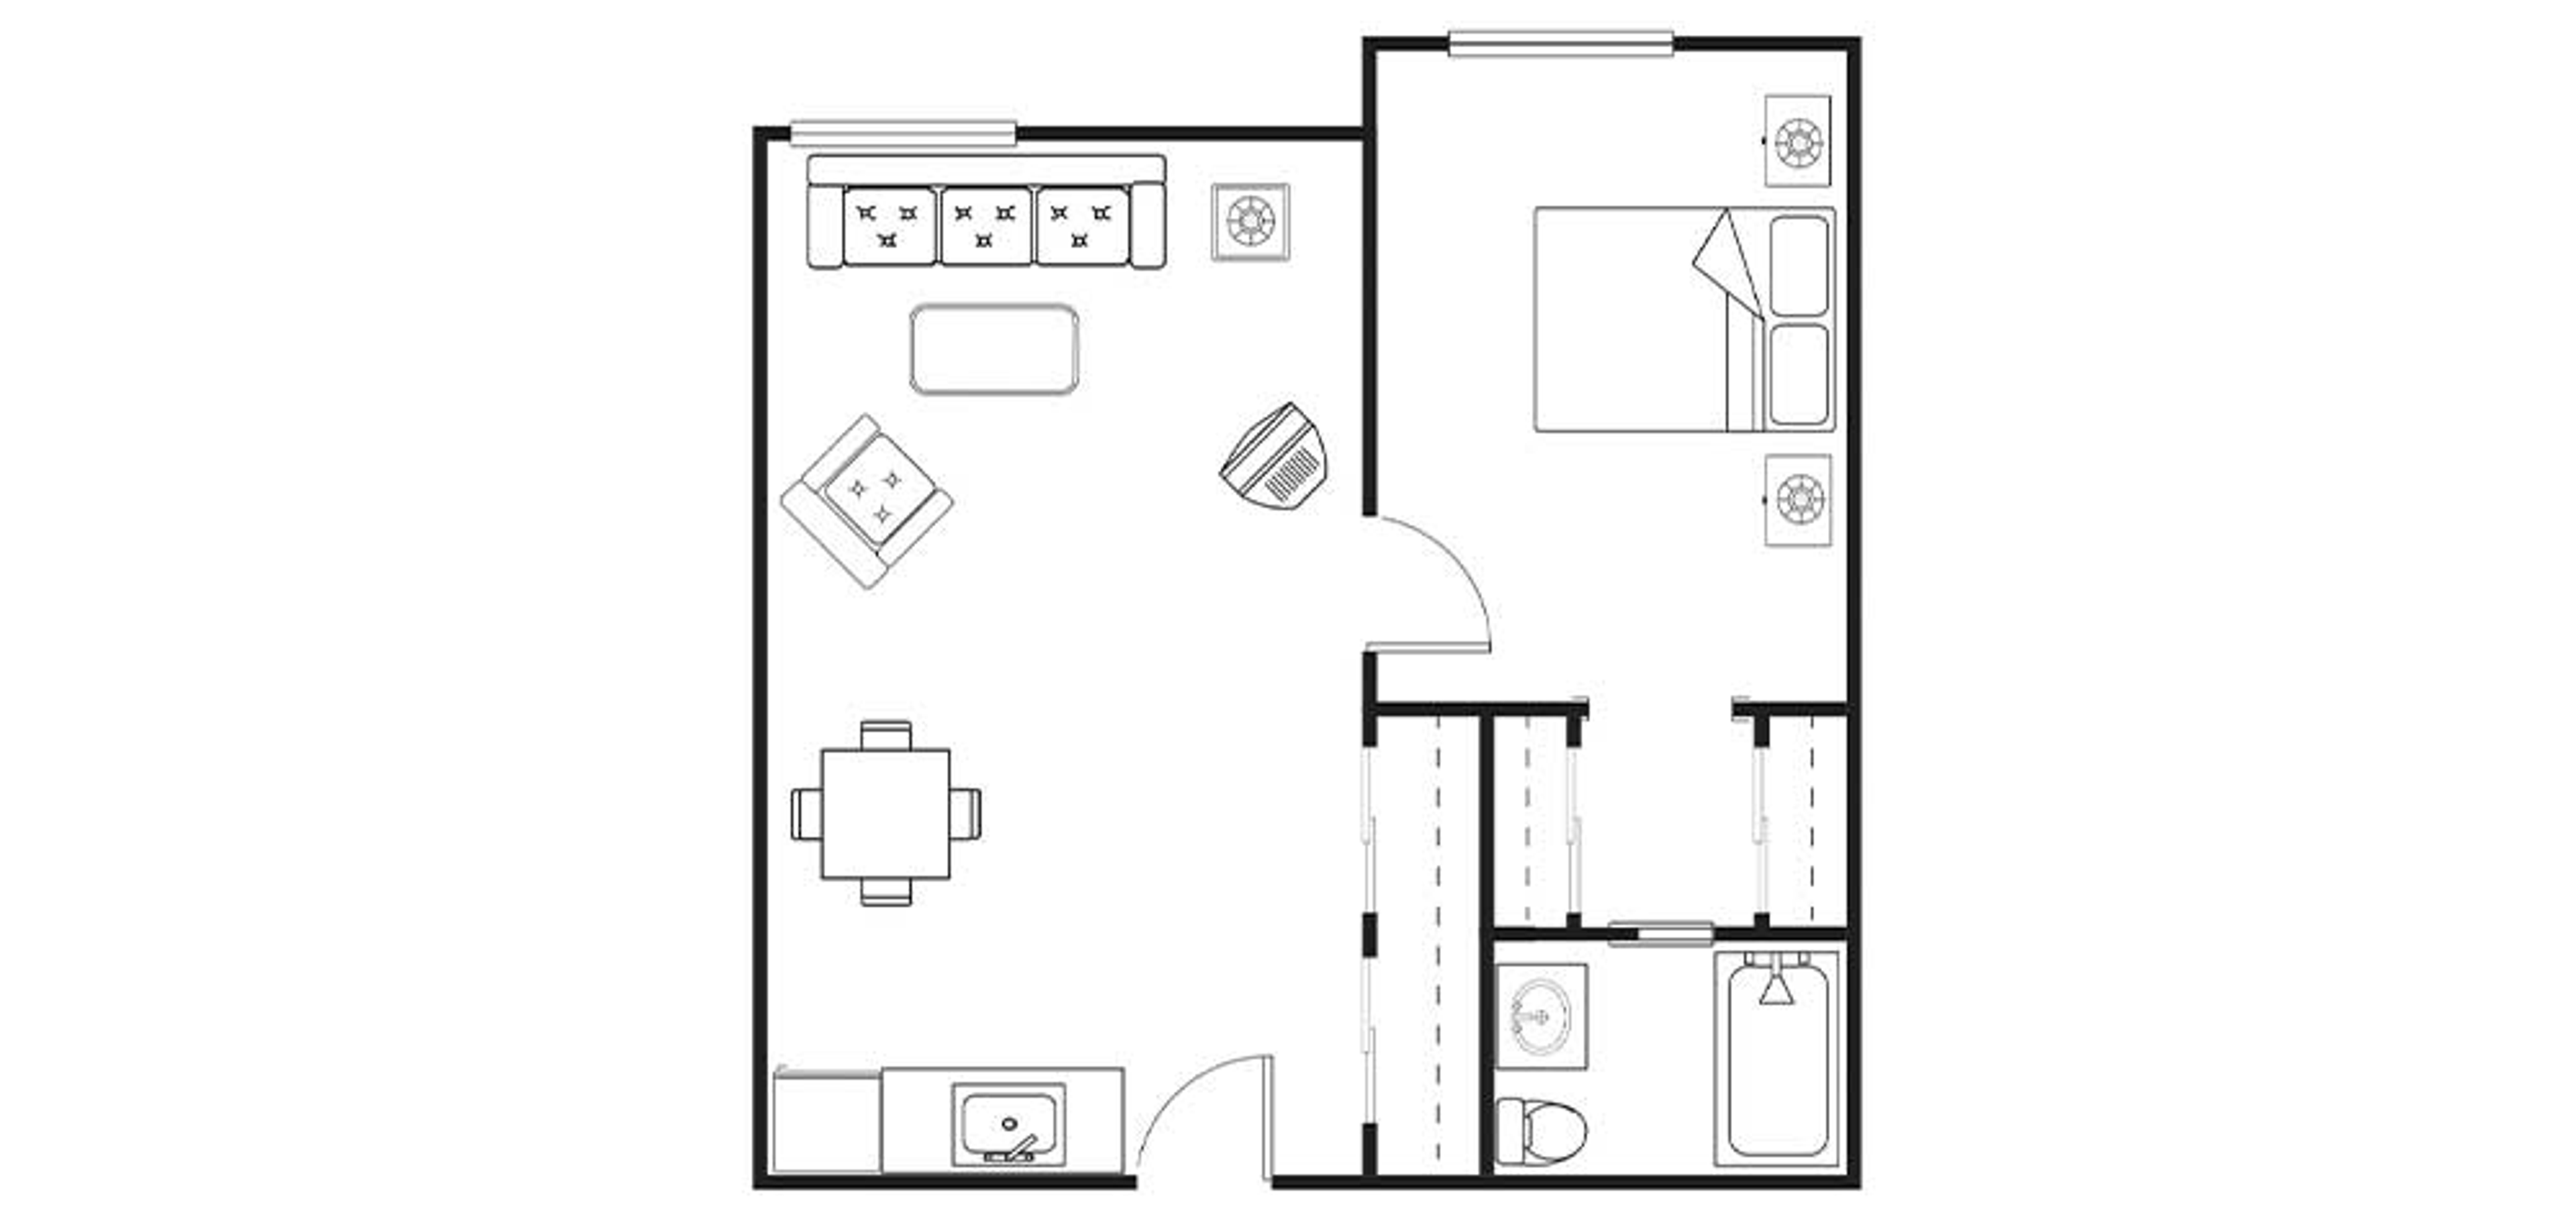 Floorplan - Redwood Heights - B4 One Bedroom 572 sq. ft. Assisted Living